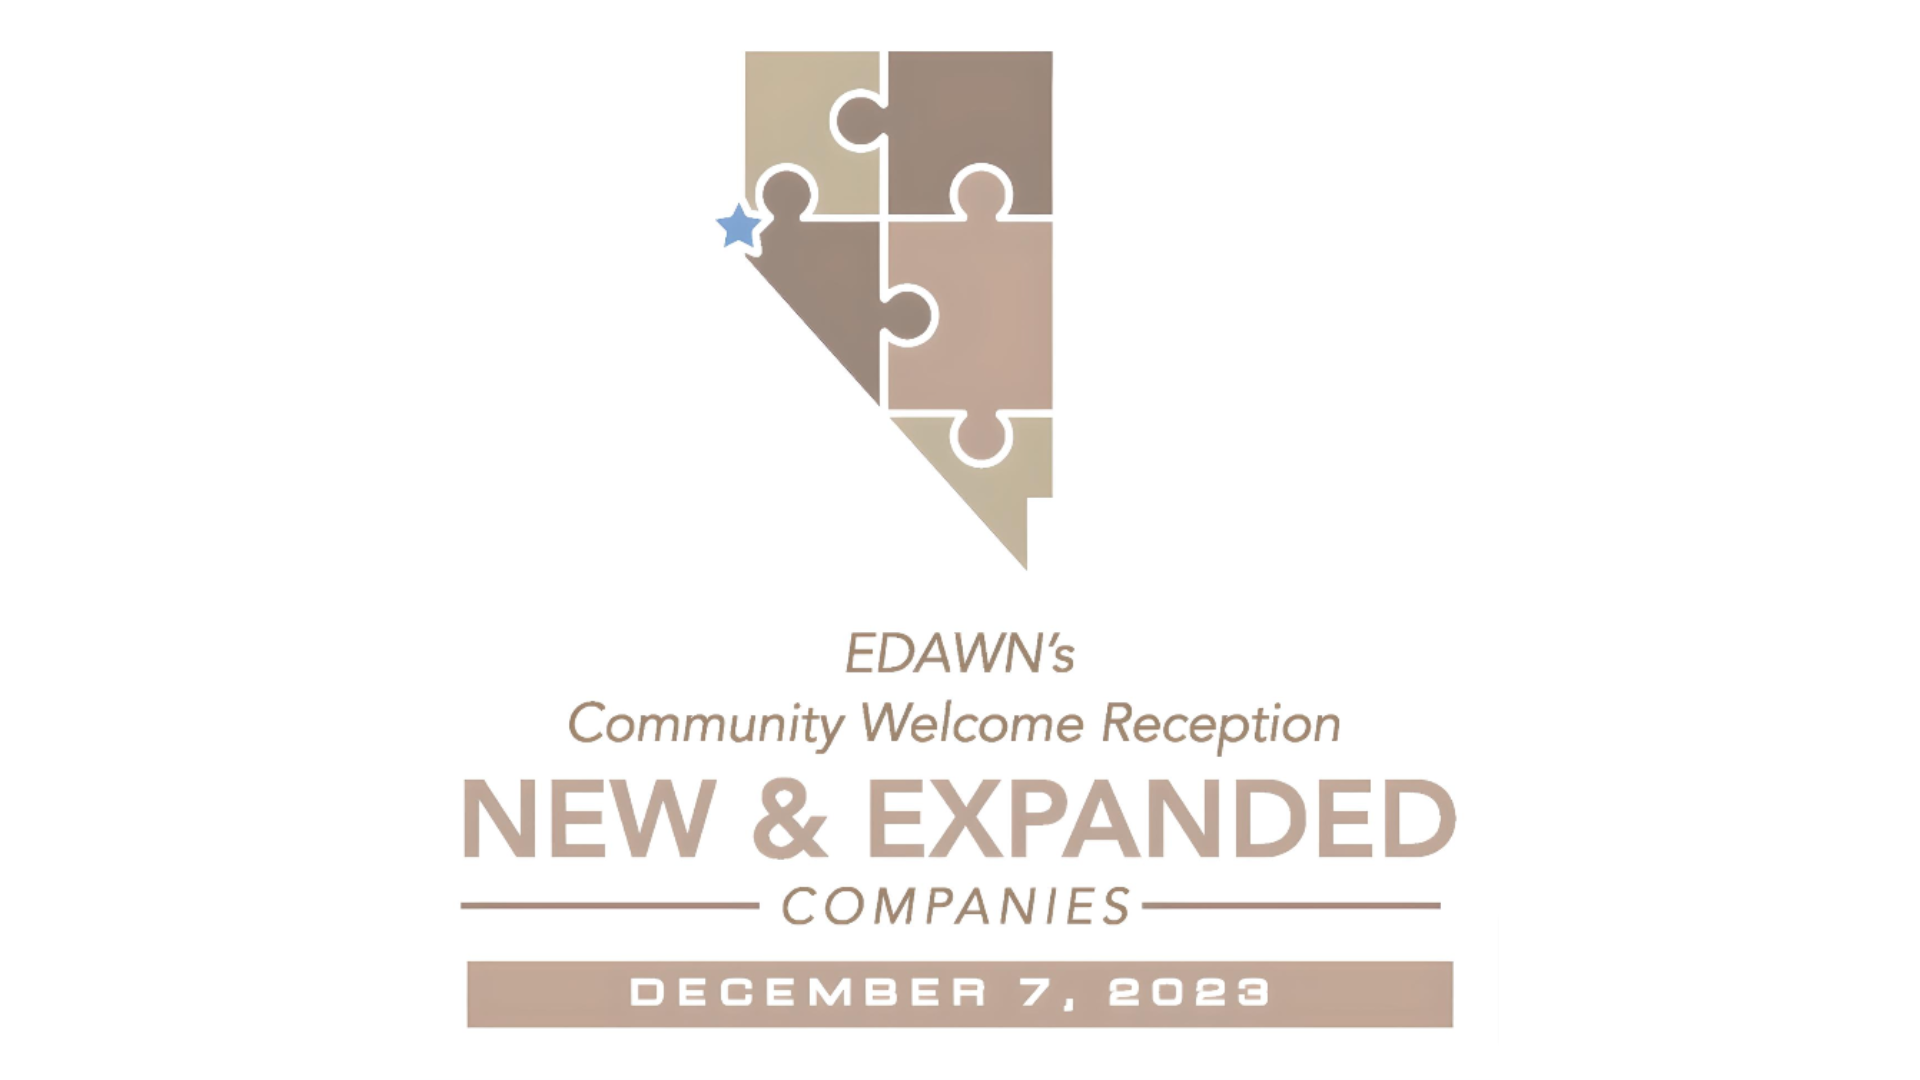 Featured image showing EDAWN's New and Expanded Companies event logo for 2023. State of Nevada parsed out with puzzle pieces and a star marking Reno, Nevada.